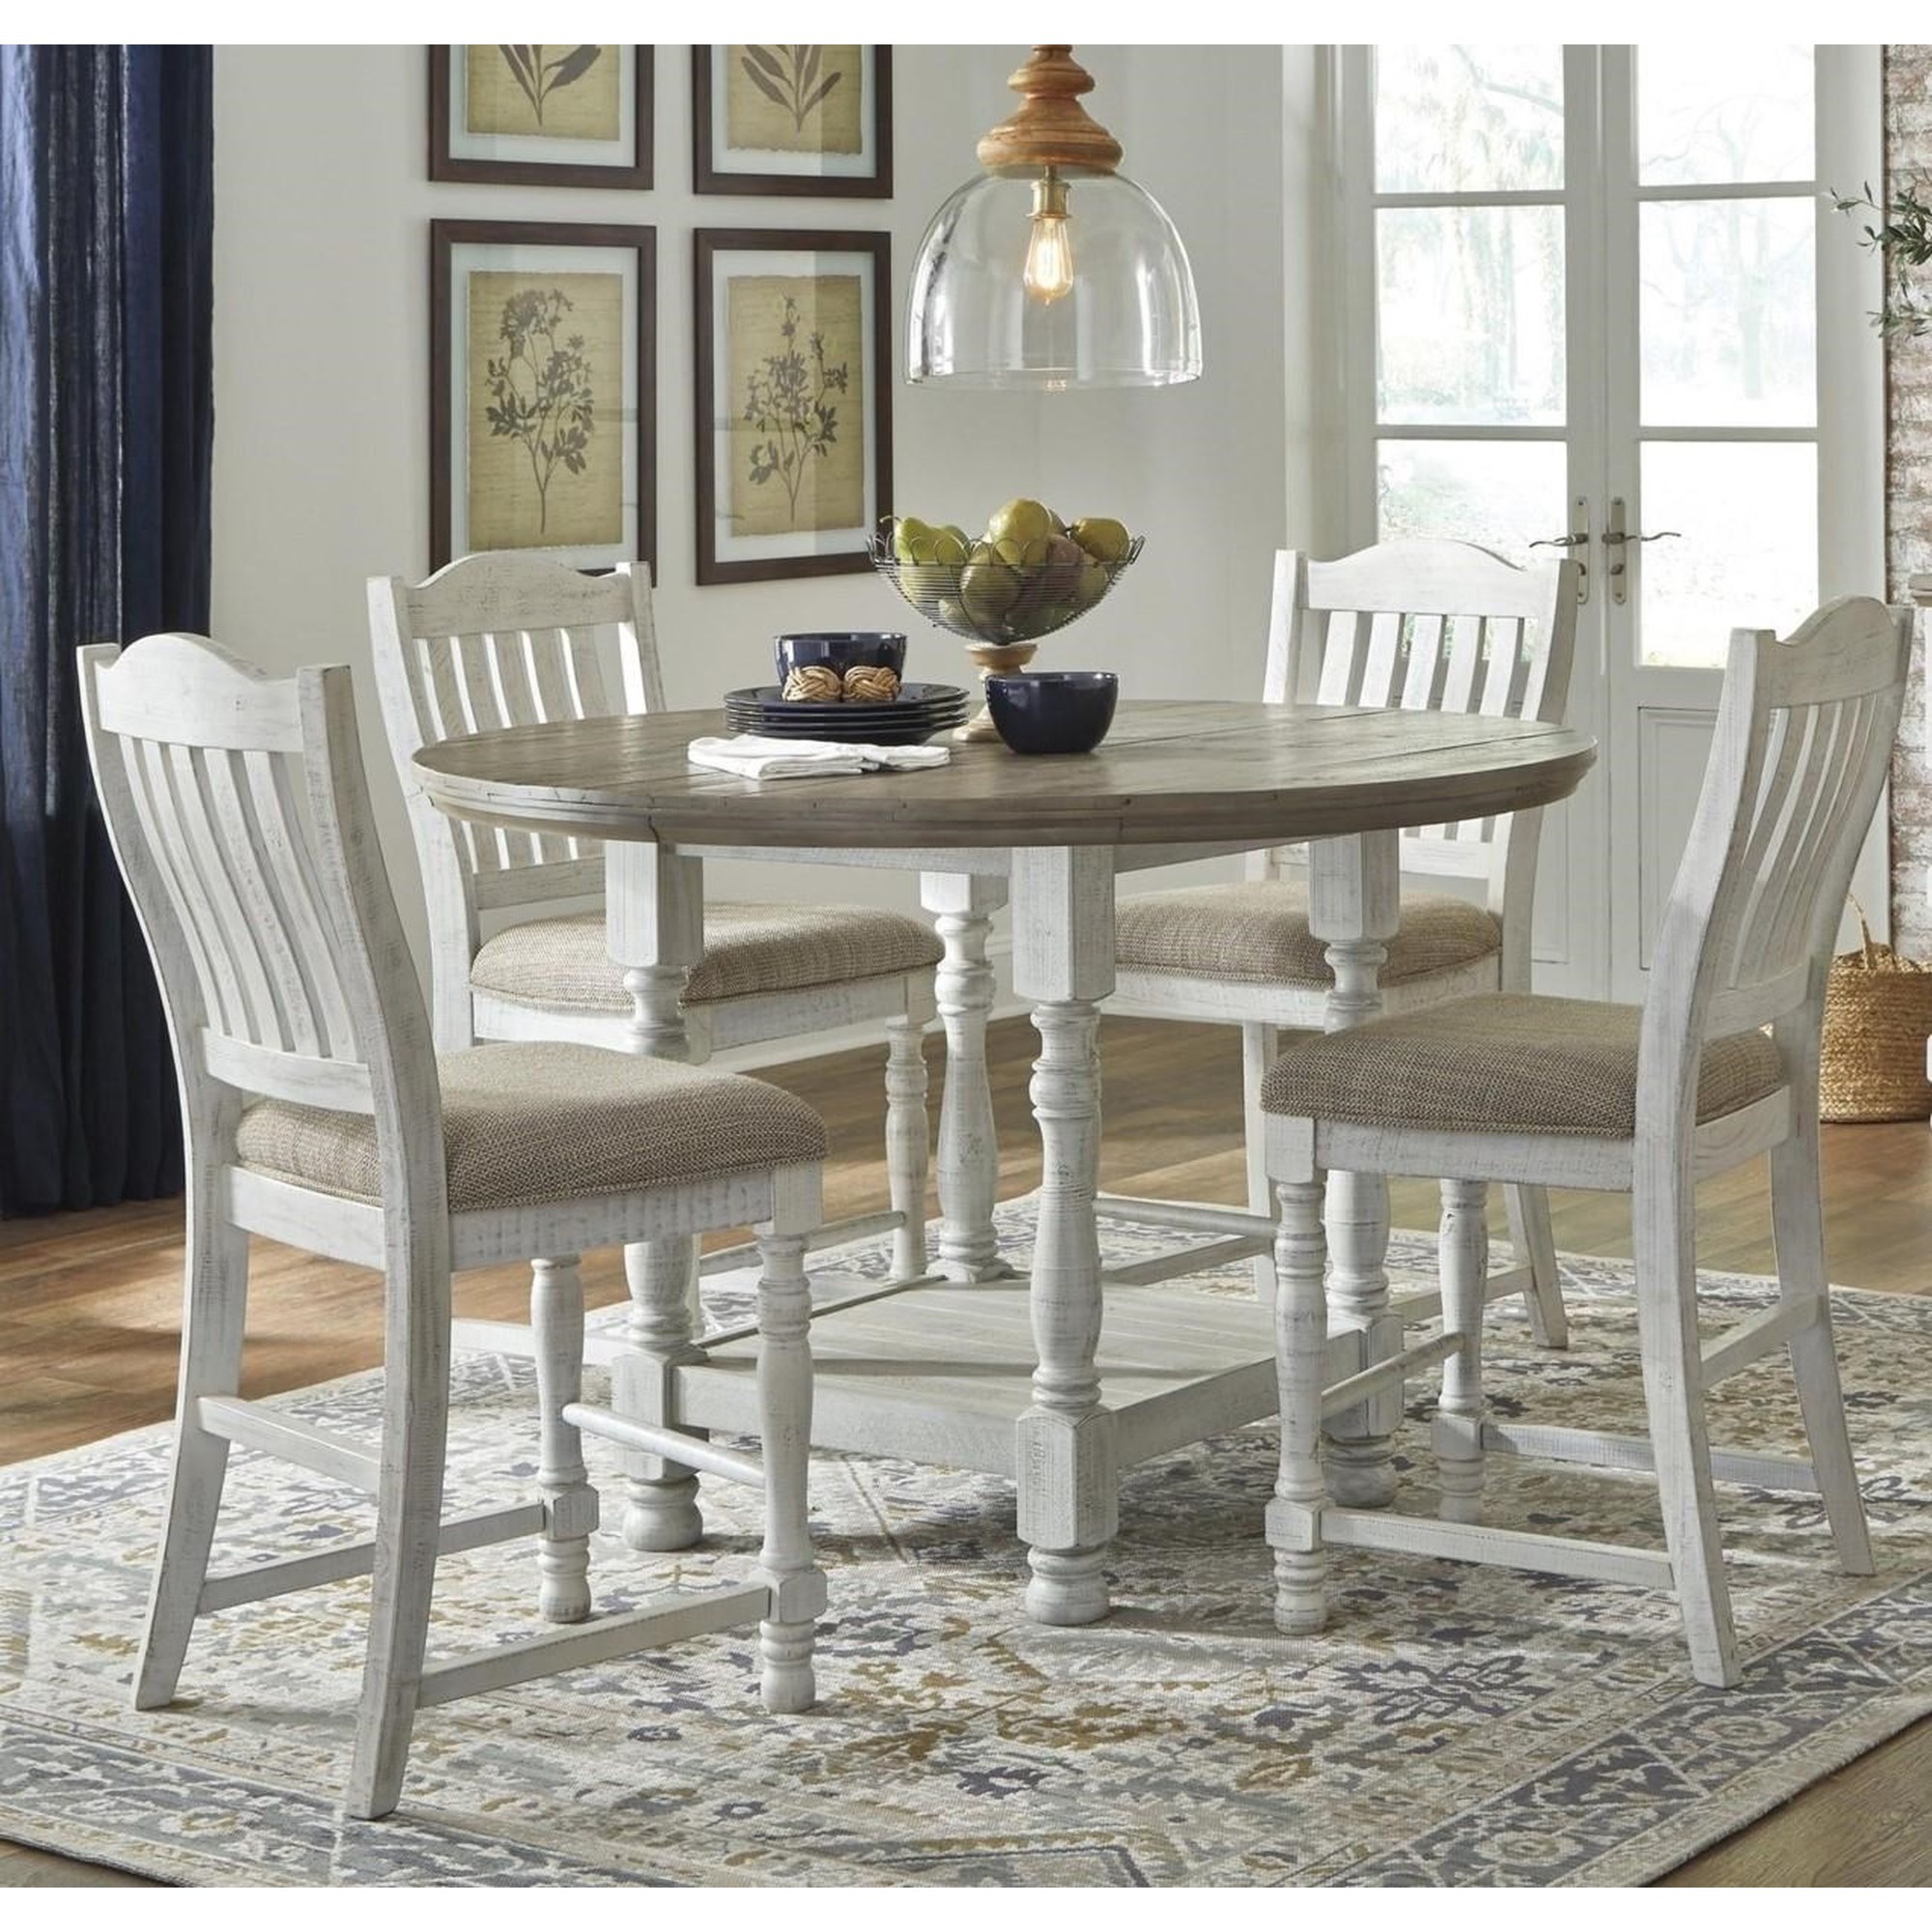 The Havalance Dining Table